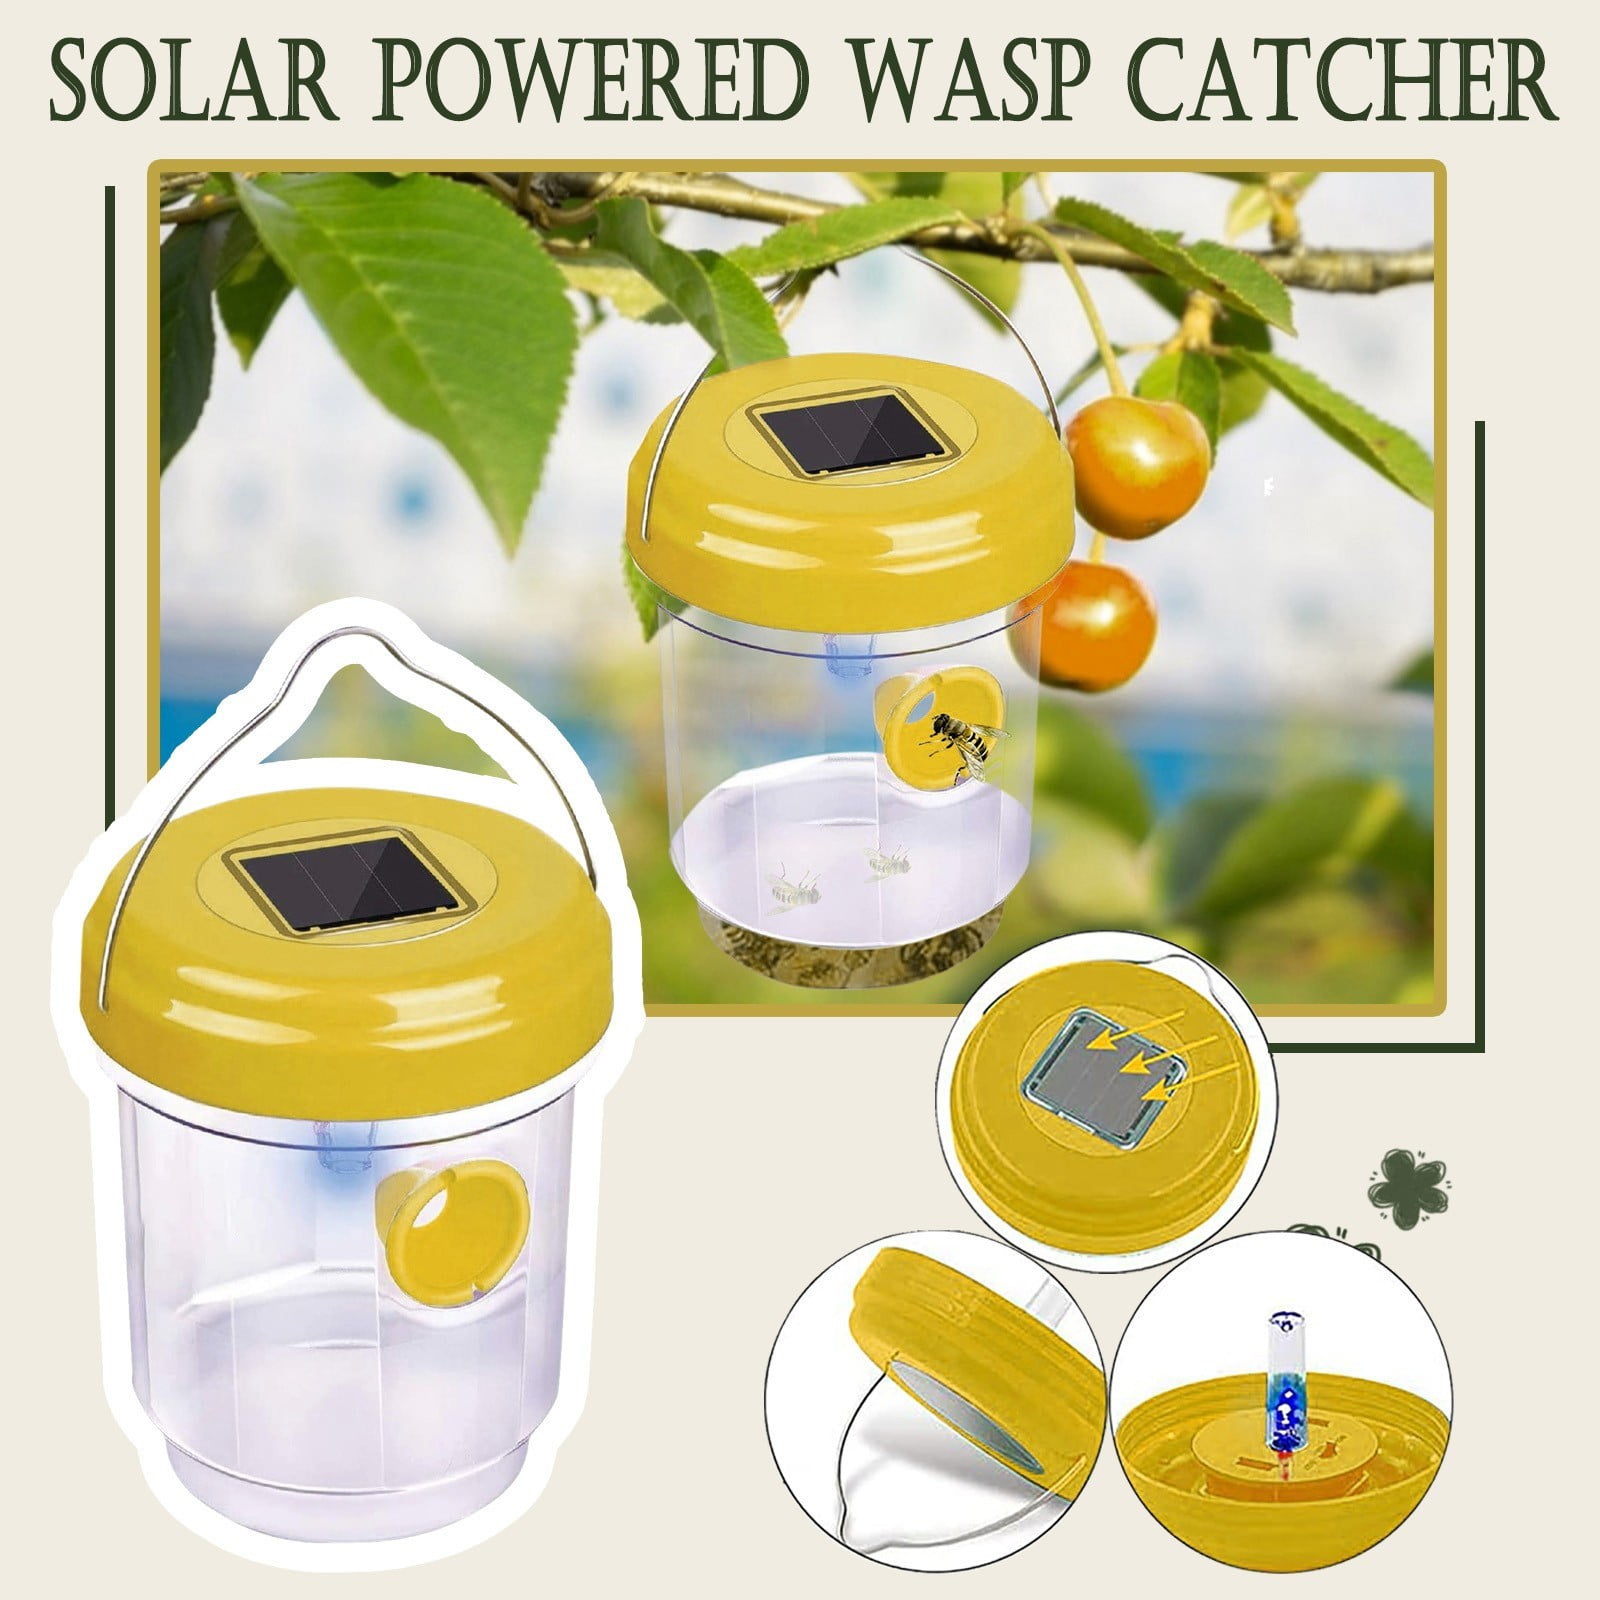 Ploknplq Fly Trap Safer Home Indoor Fly Trap Catcher Energy Solar Hanging Fly Outdoor Trap Bee Catcher Fruit Fly Traps for Indoors B, Size: 2XL